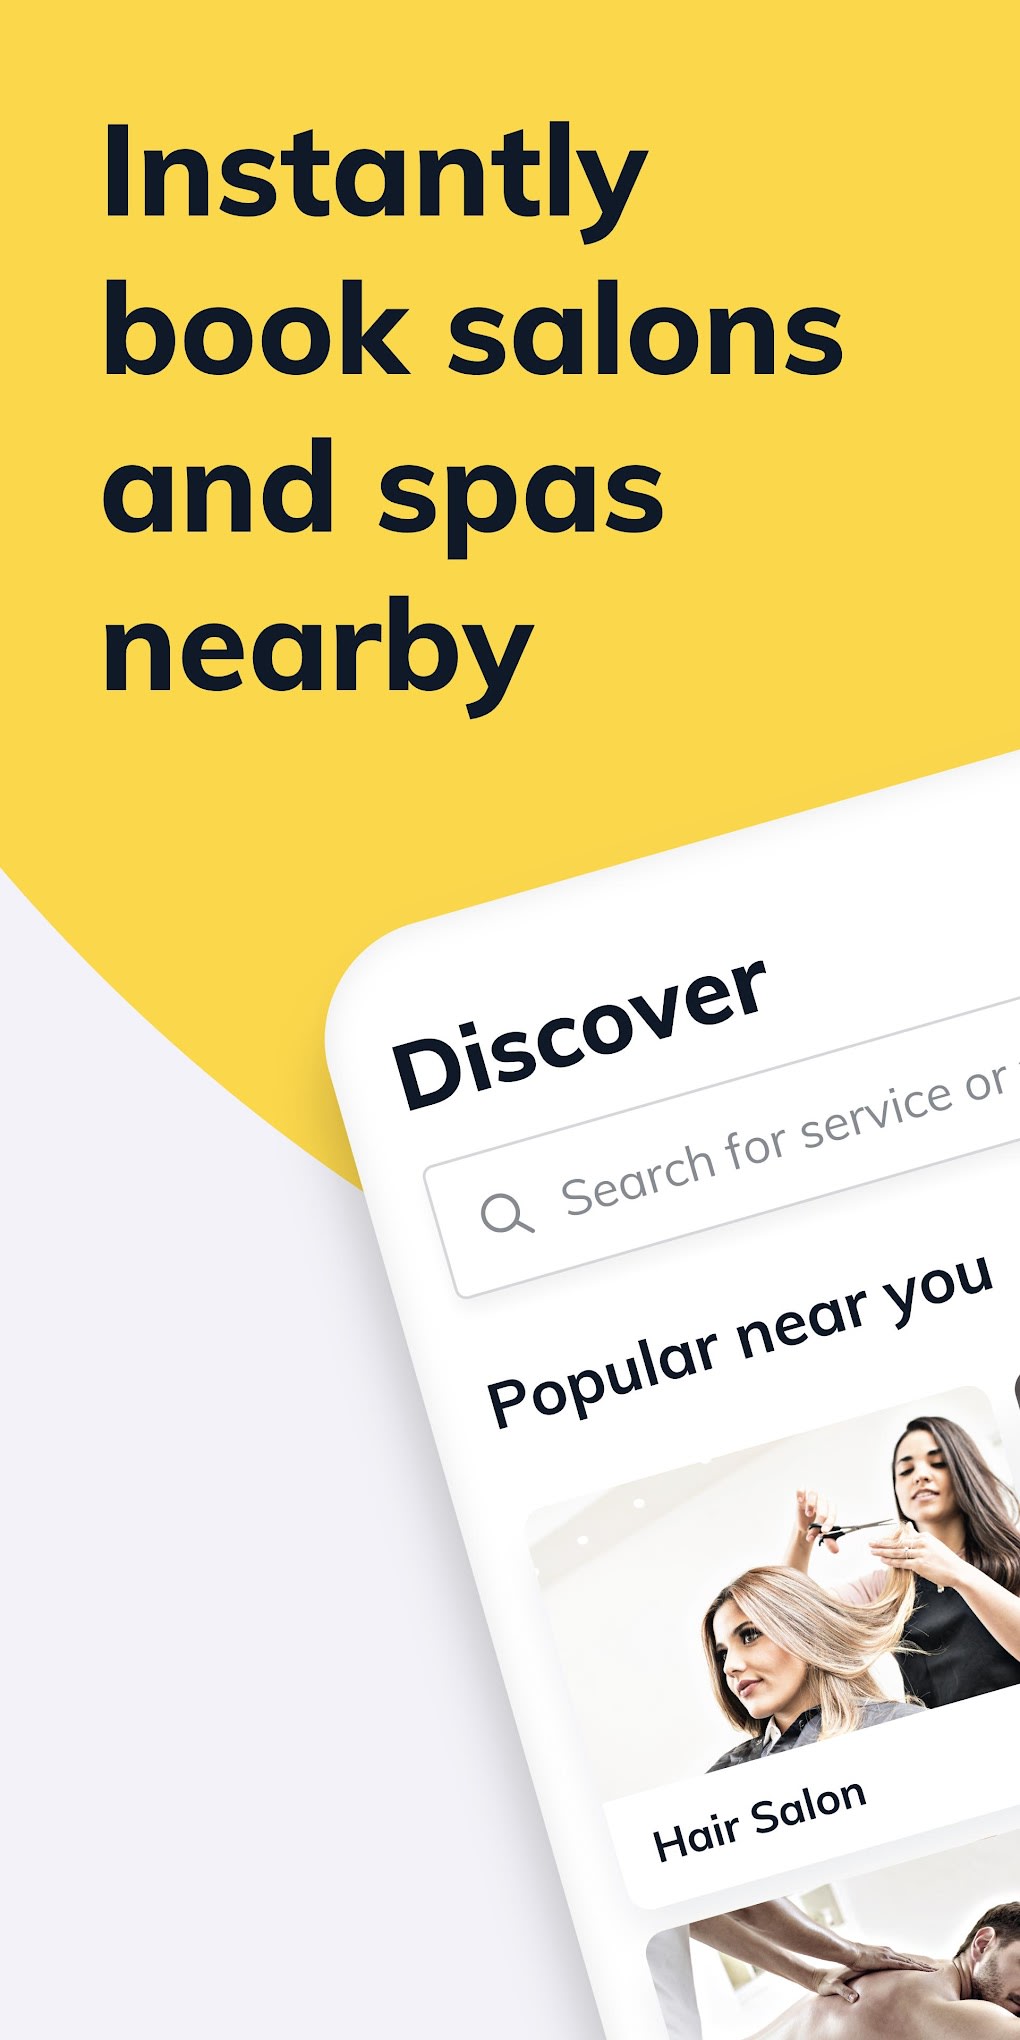 Fresha - Instantly book salons and spas nearby